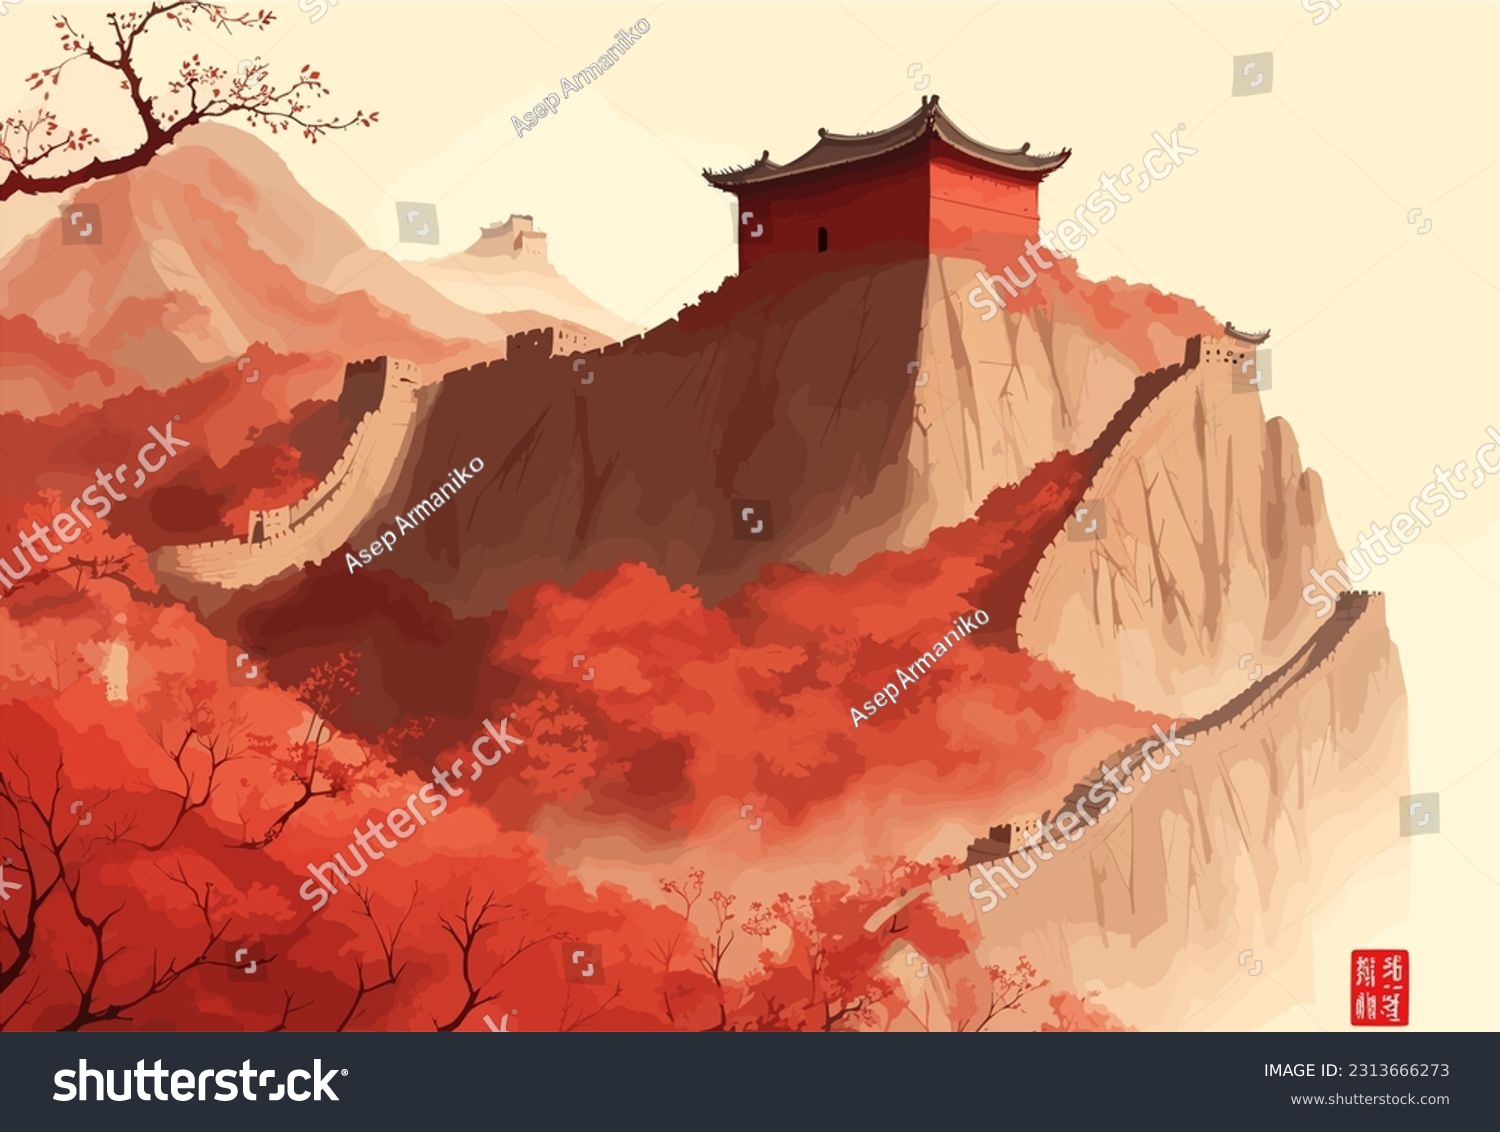 SVG of A captivating vector illustration of the Great Wall of China stretches across the landscape, its winding path and imposing watchtowers depicted in exquisite detail, evoking a sense of ancient grandeur svg